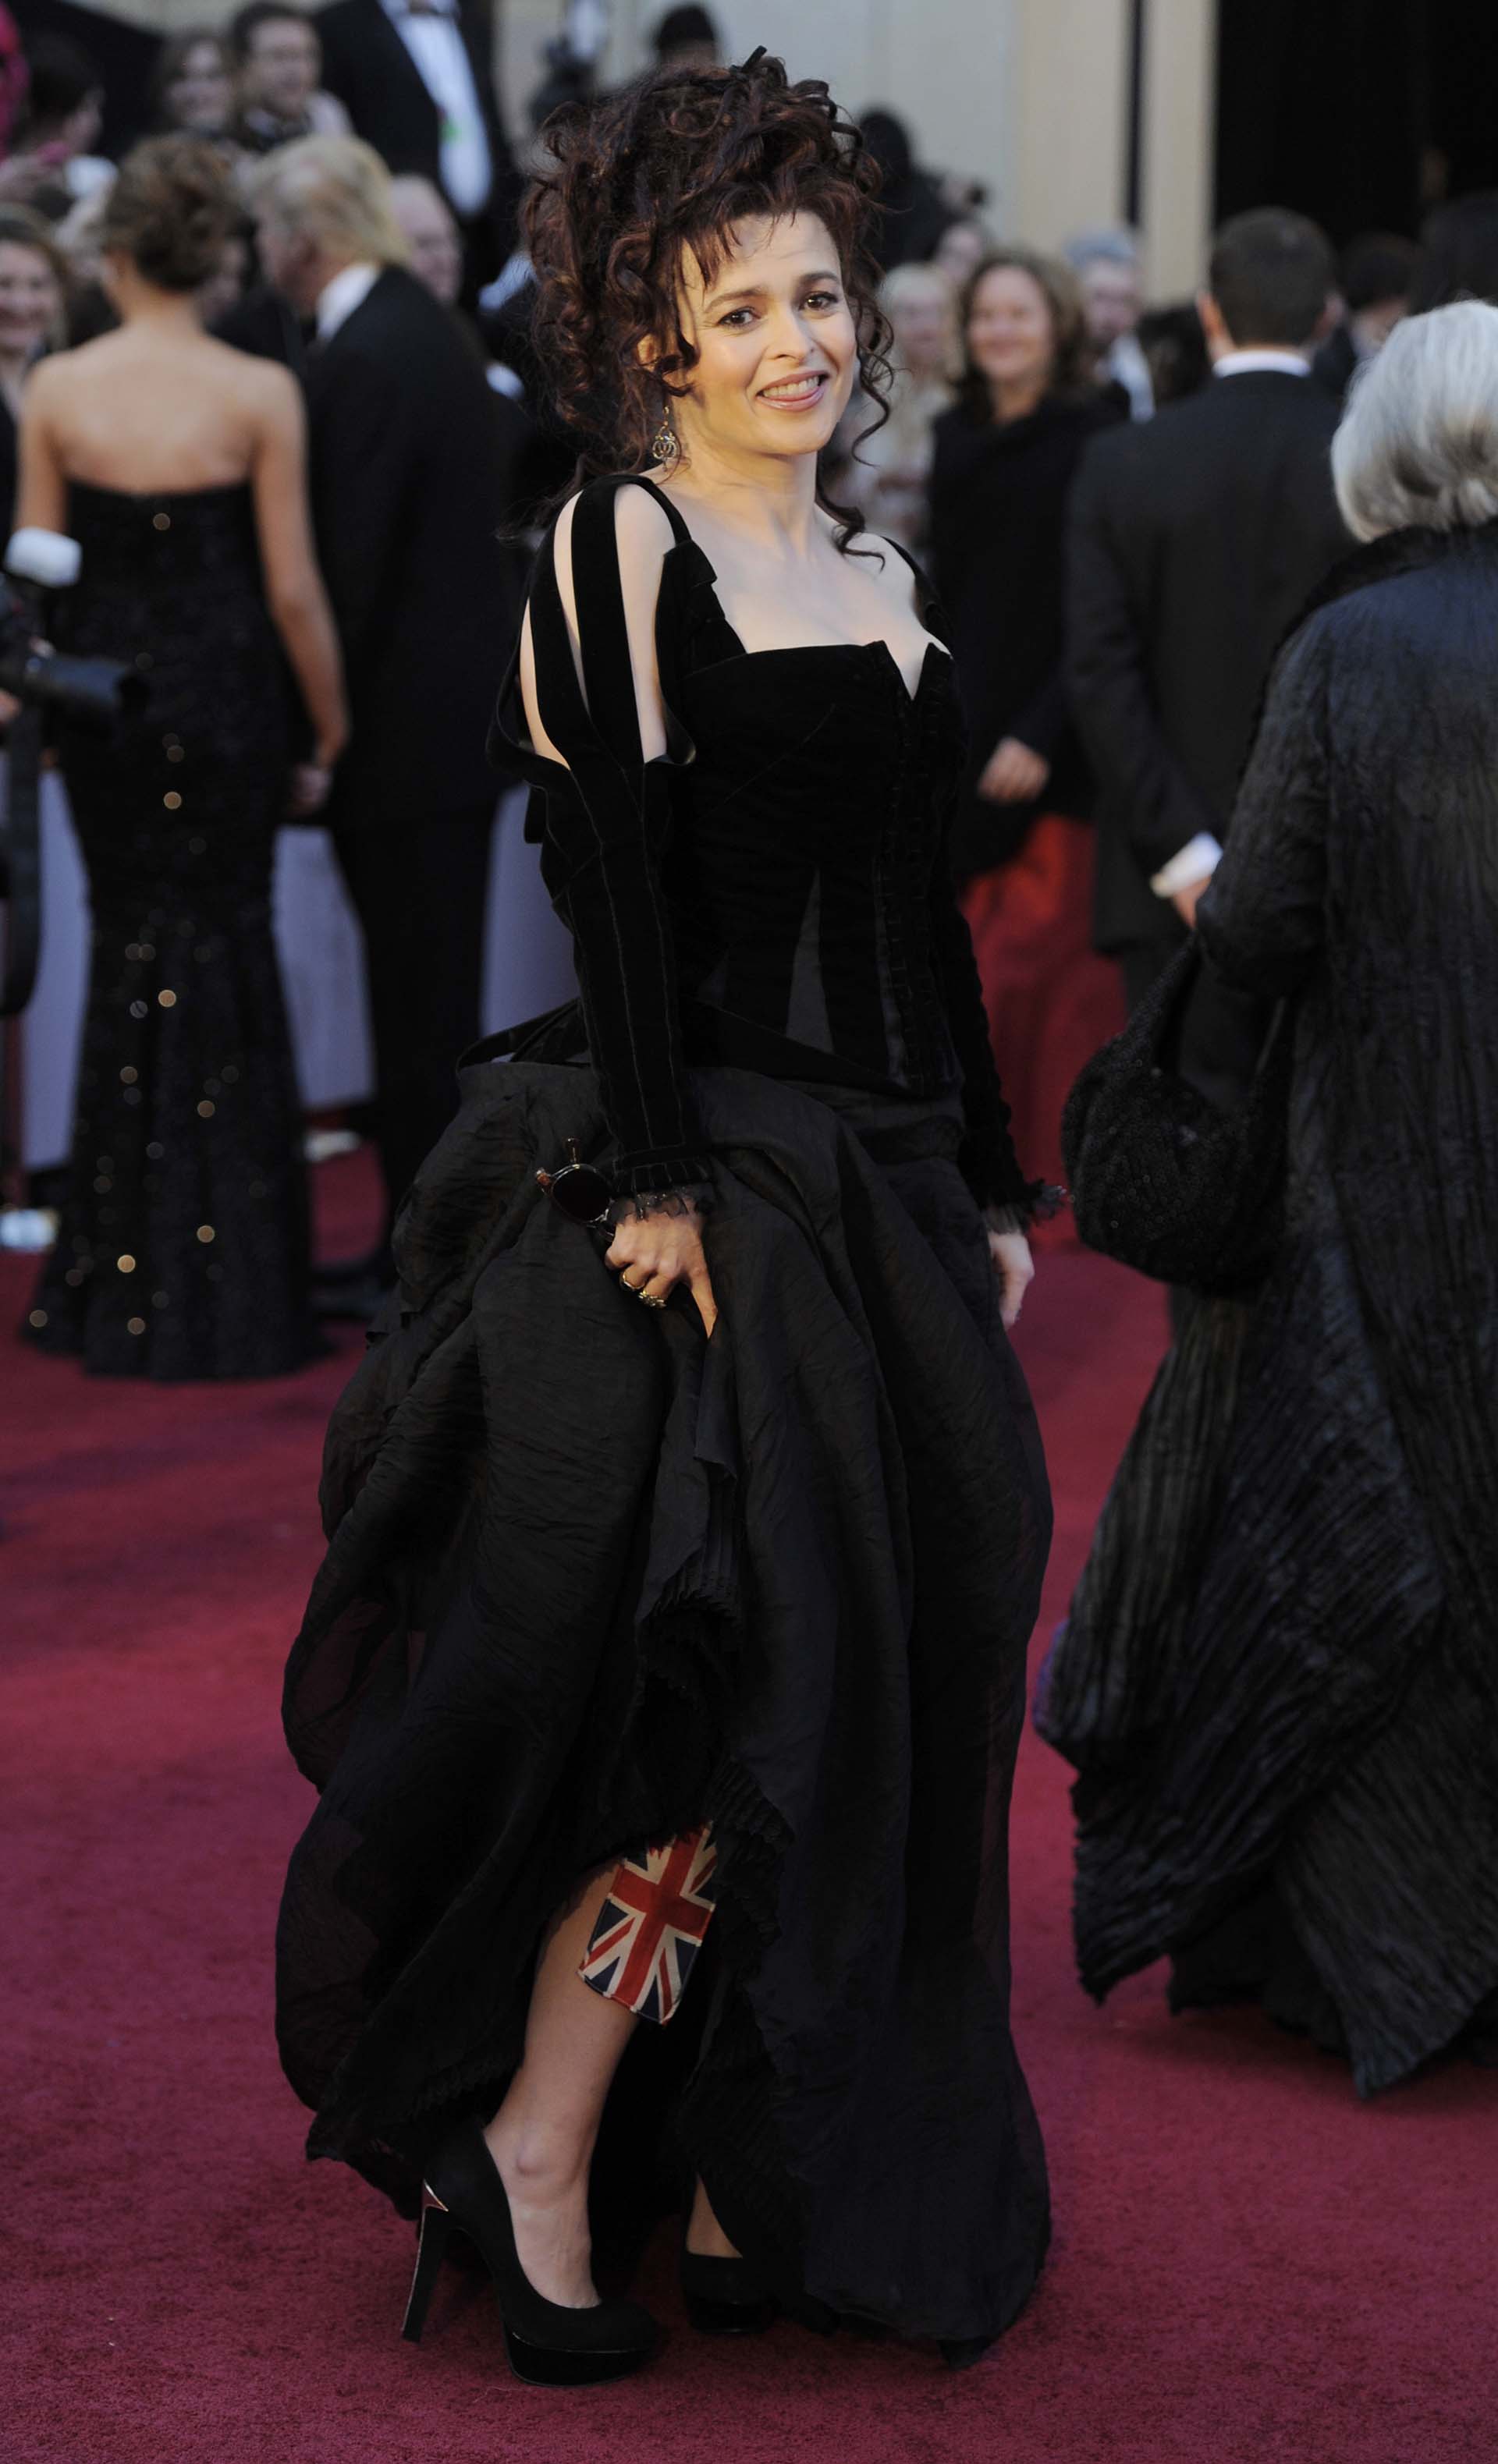 .Actress Helena Bonham Carter arrives before the 83rd Academy Awards on Sunday, Feb. 27, 2011, in the Hollywood section of Los Angeles.